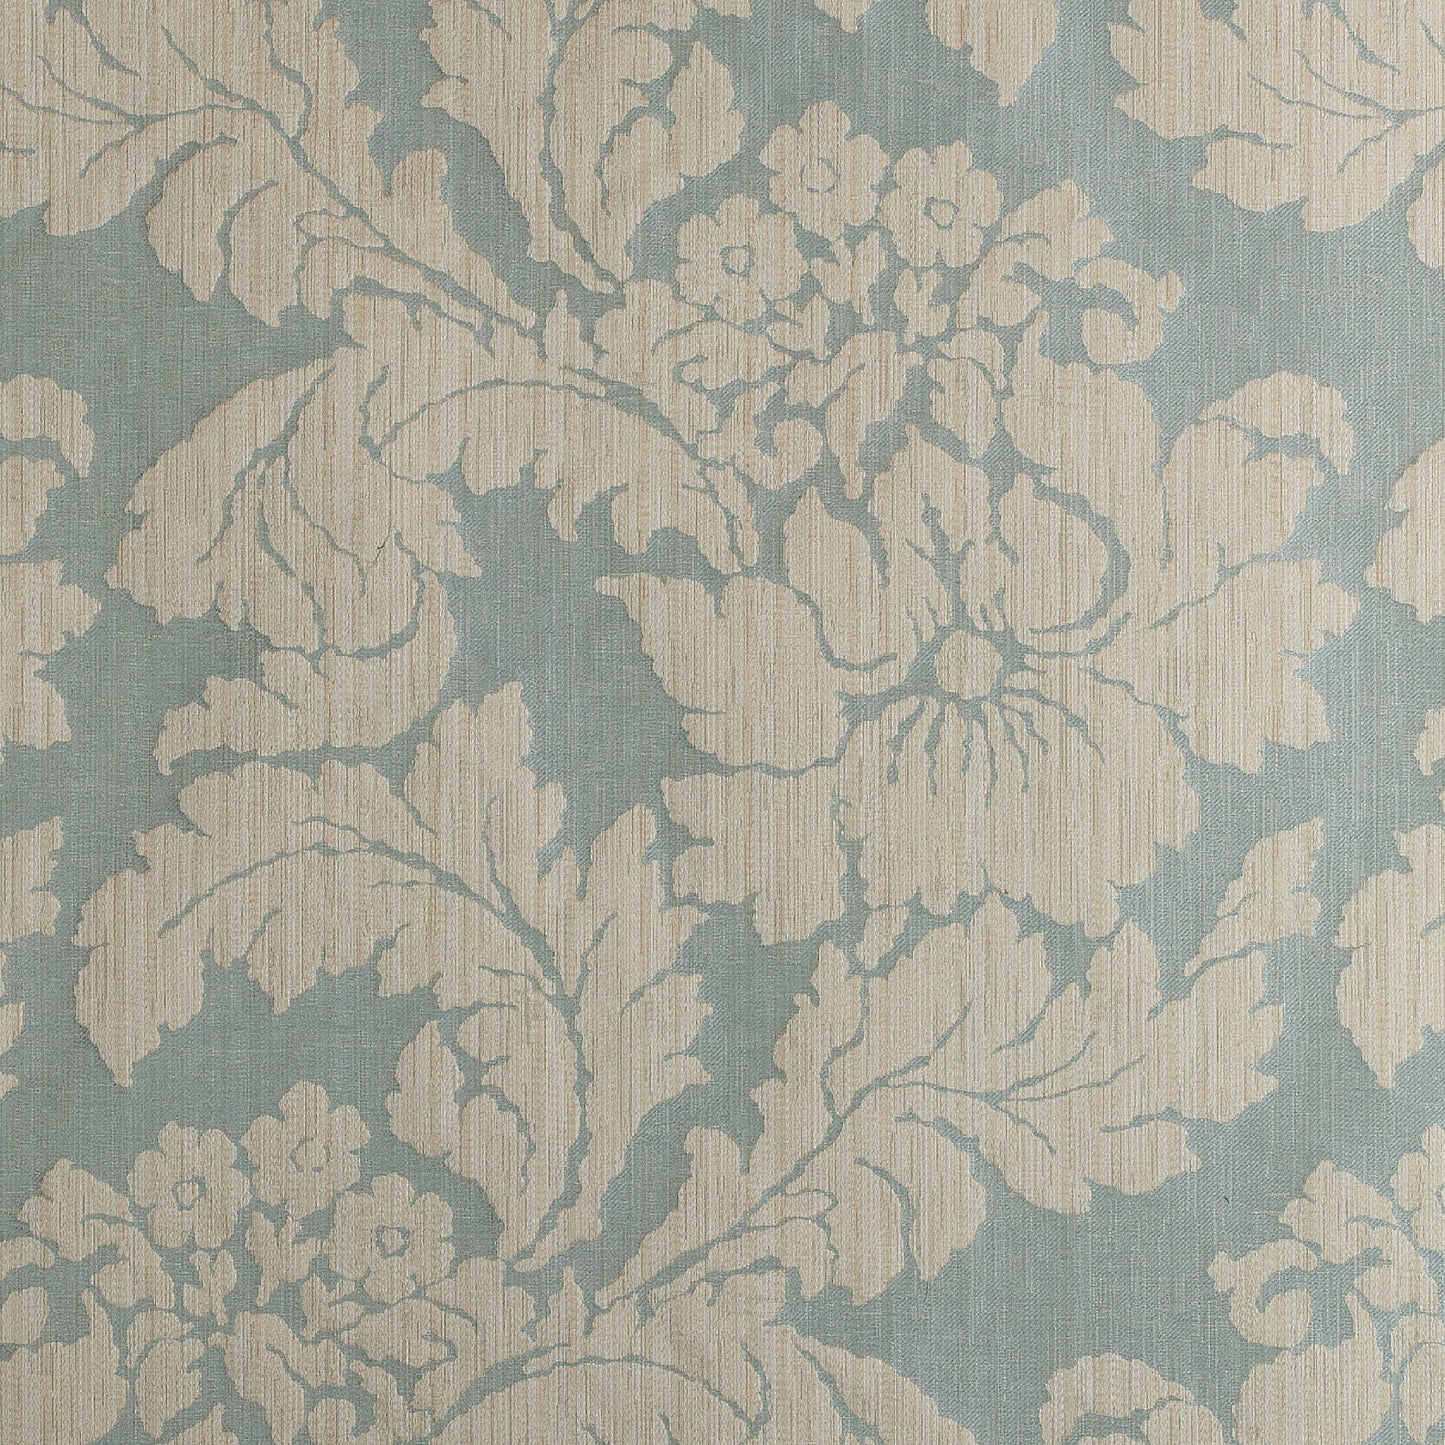 Purchase  Ann French Fabric Product AW72982  pattern name  Caserta Damask